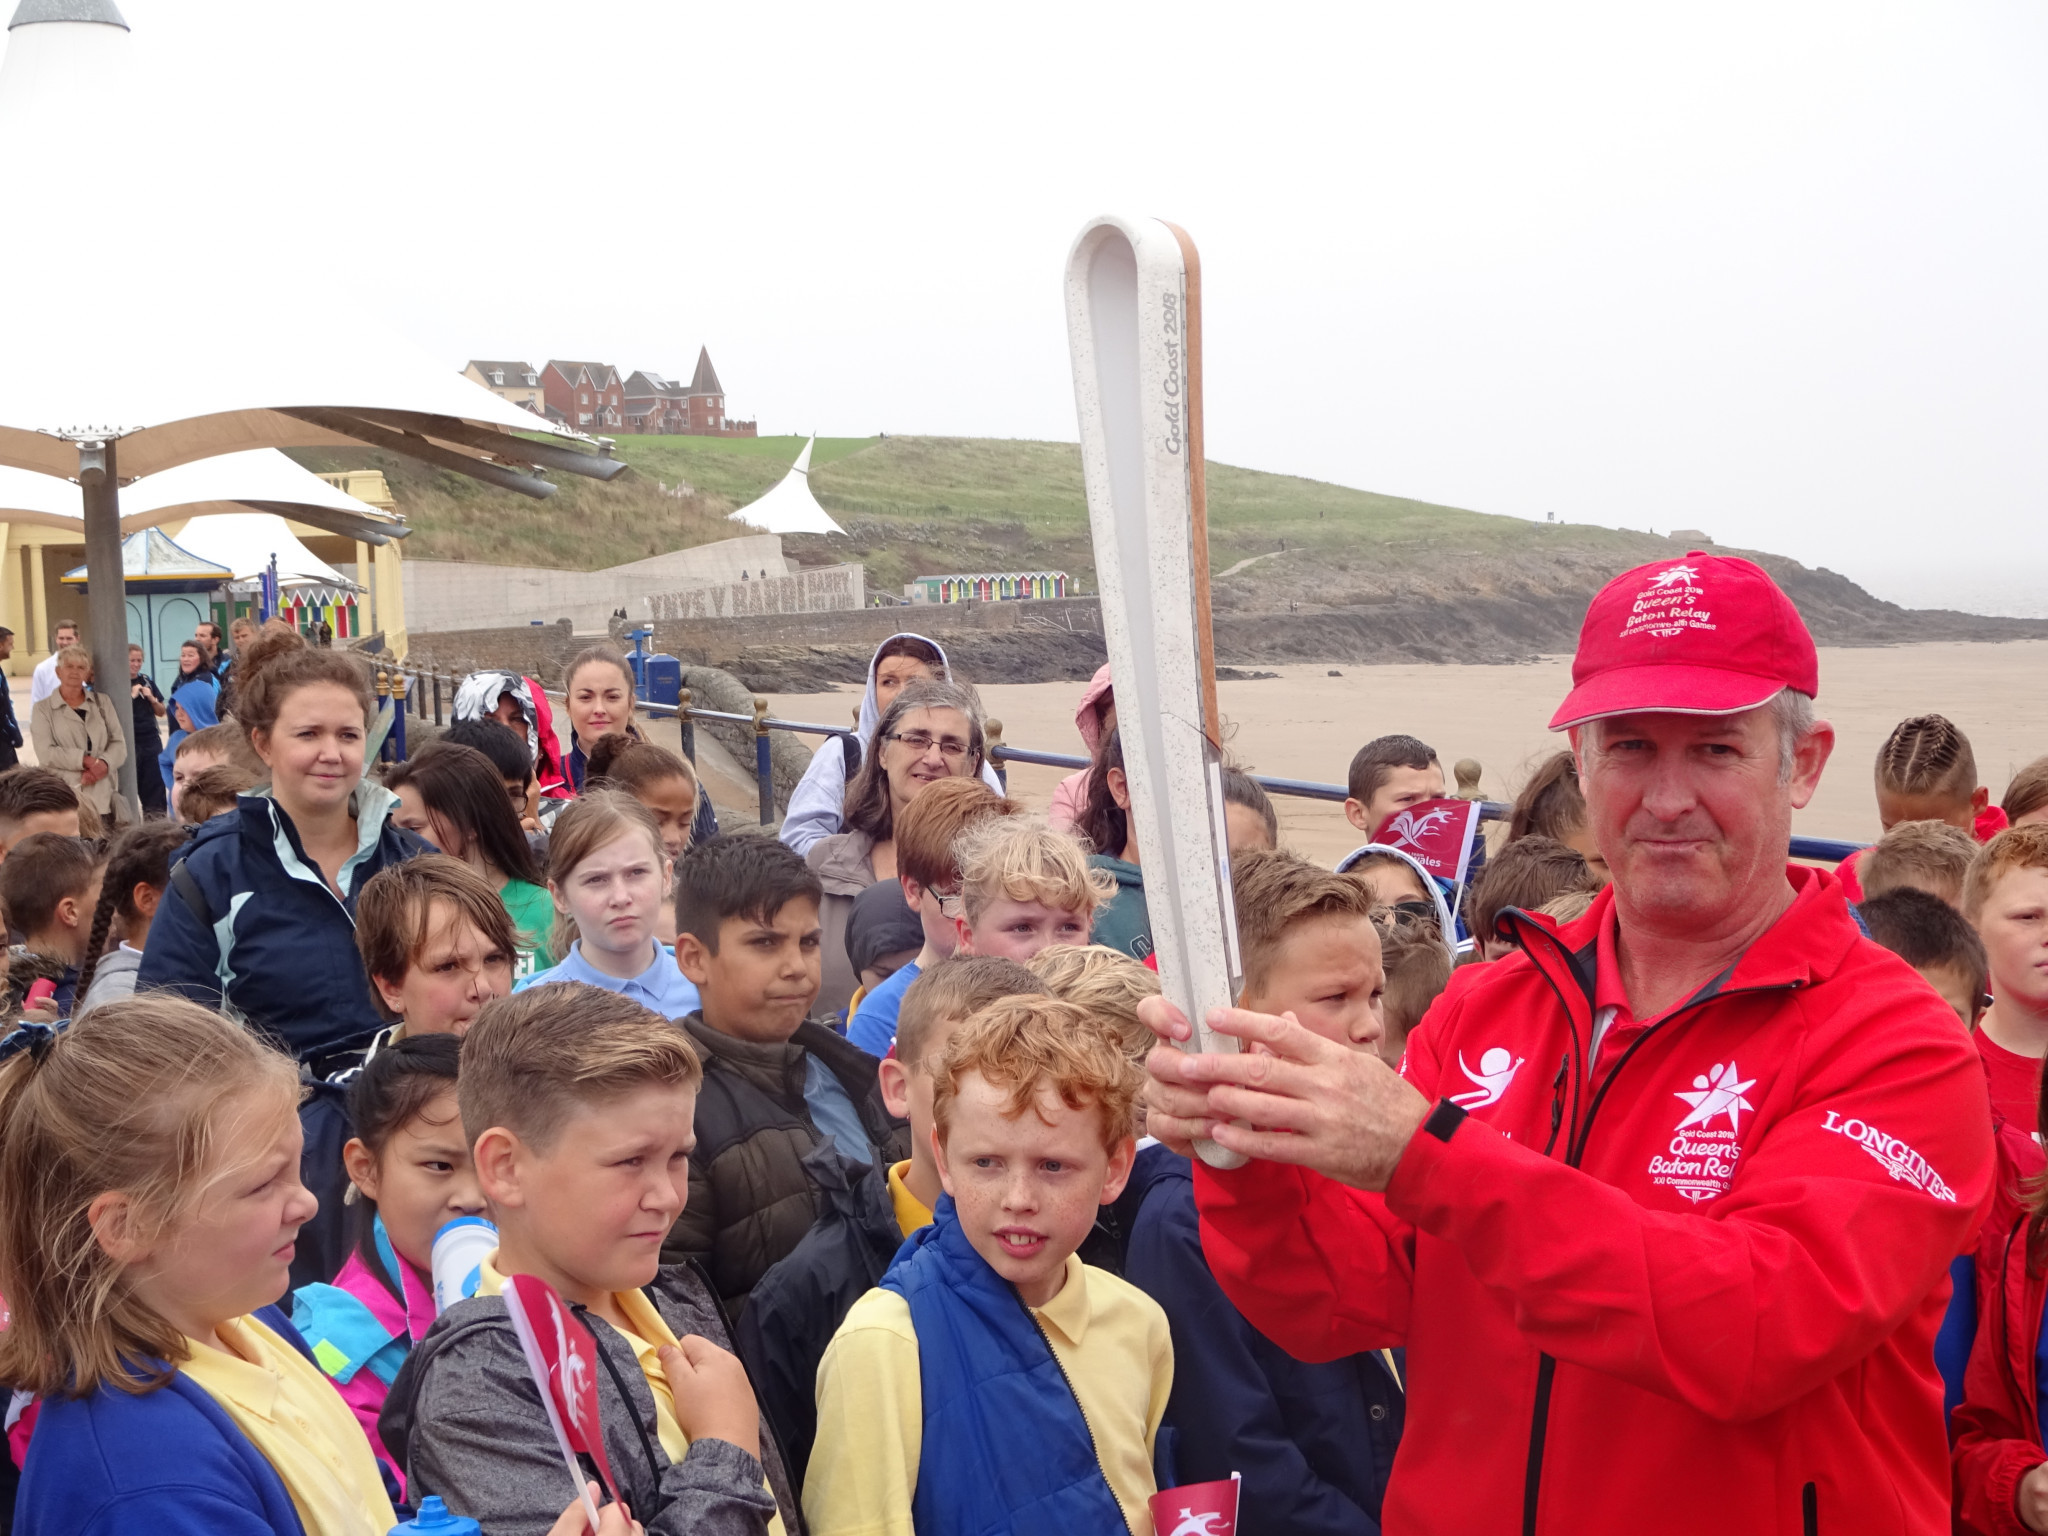 Children check out the Gold Coast 2018 Baton in Barry in Wales ©Philip Barker